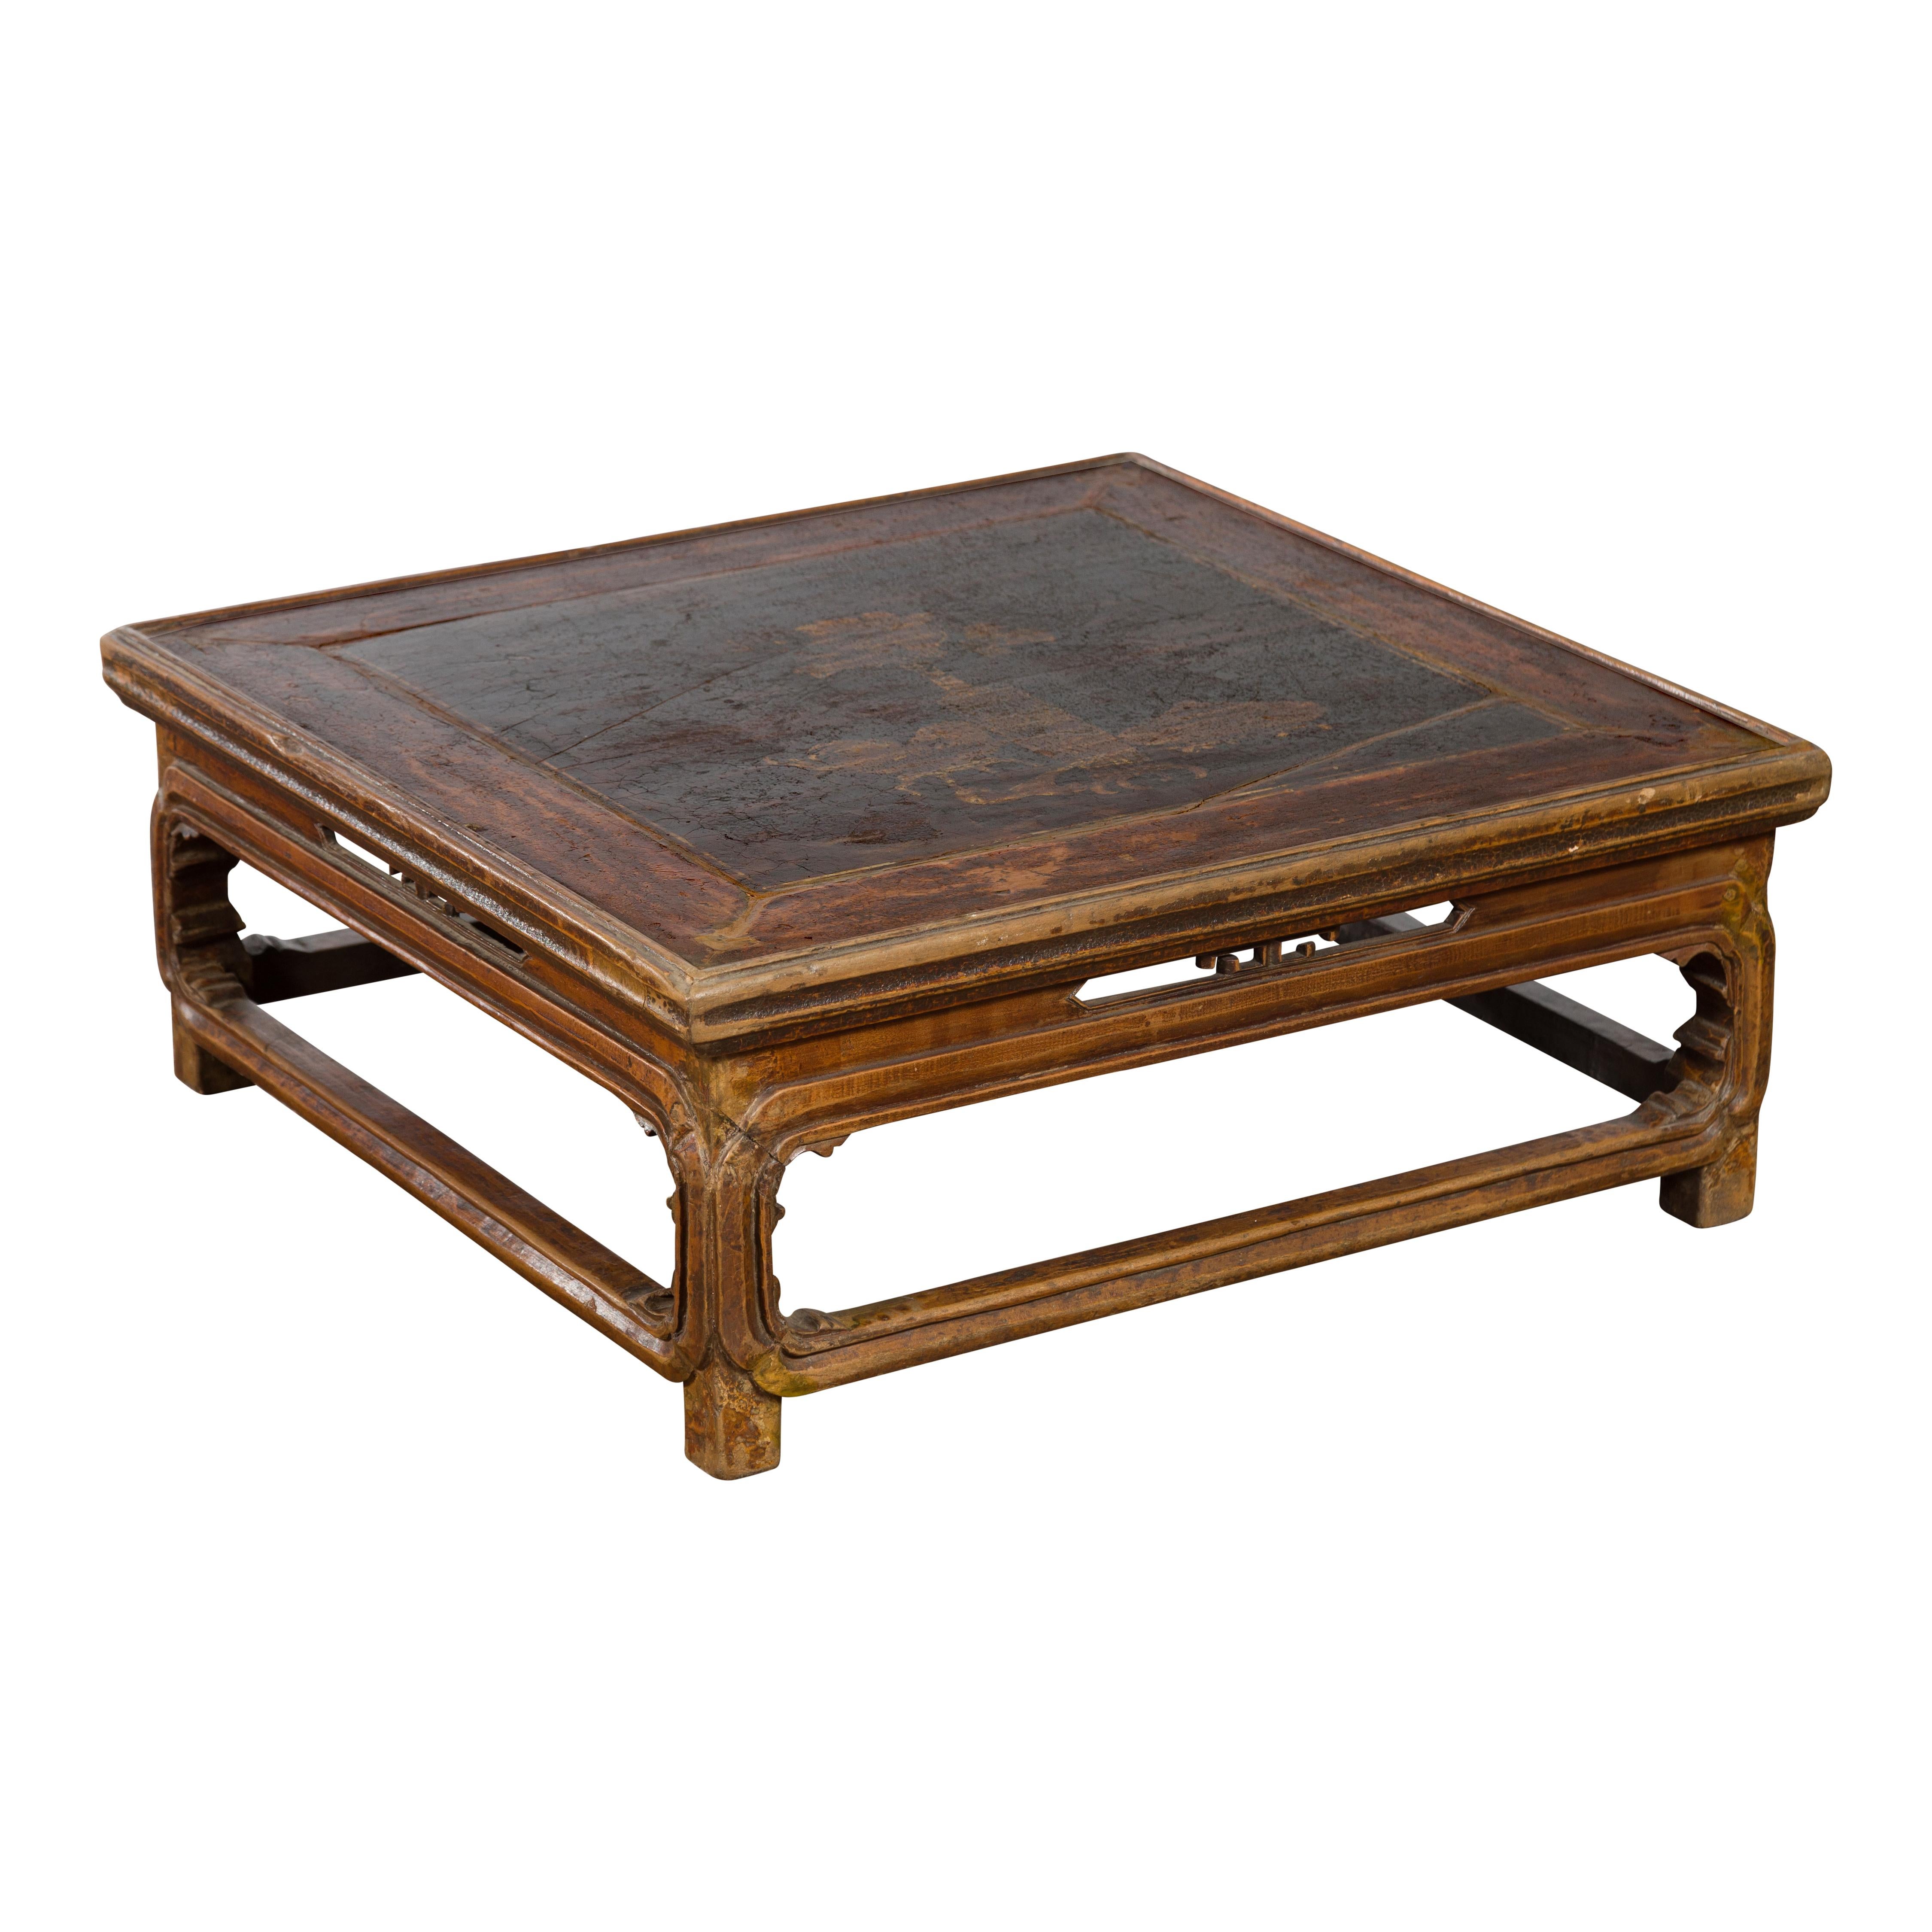 Qing Dynasty 19th Century Chinese Low Kang Coffee Table with Painted Décor For Sale